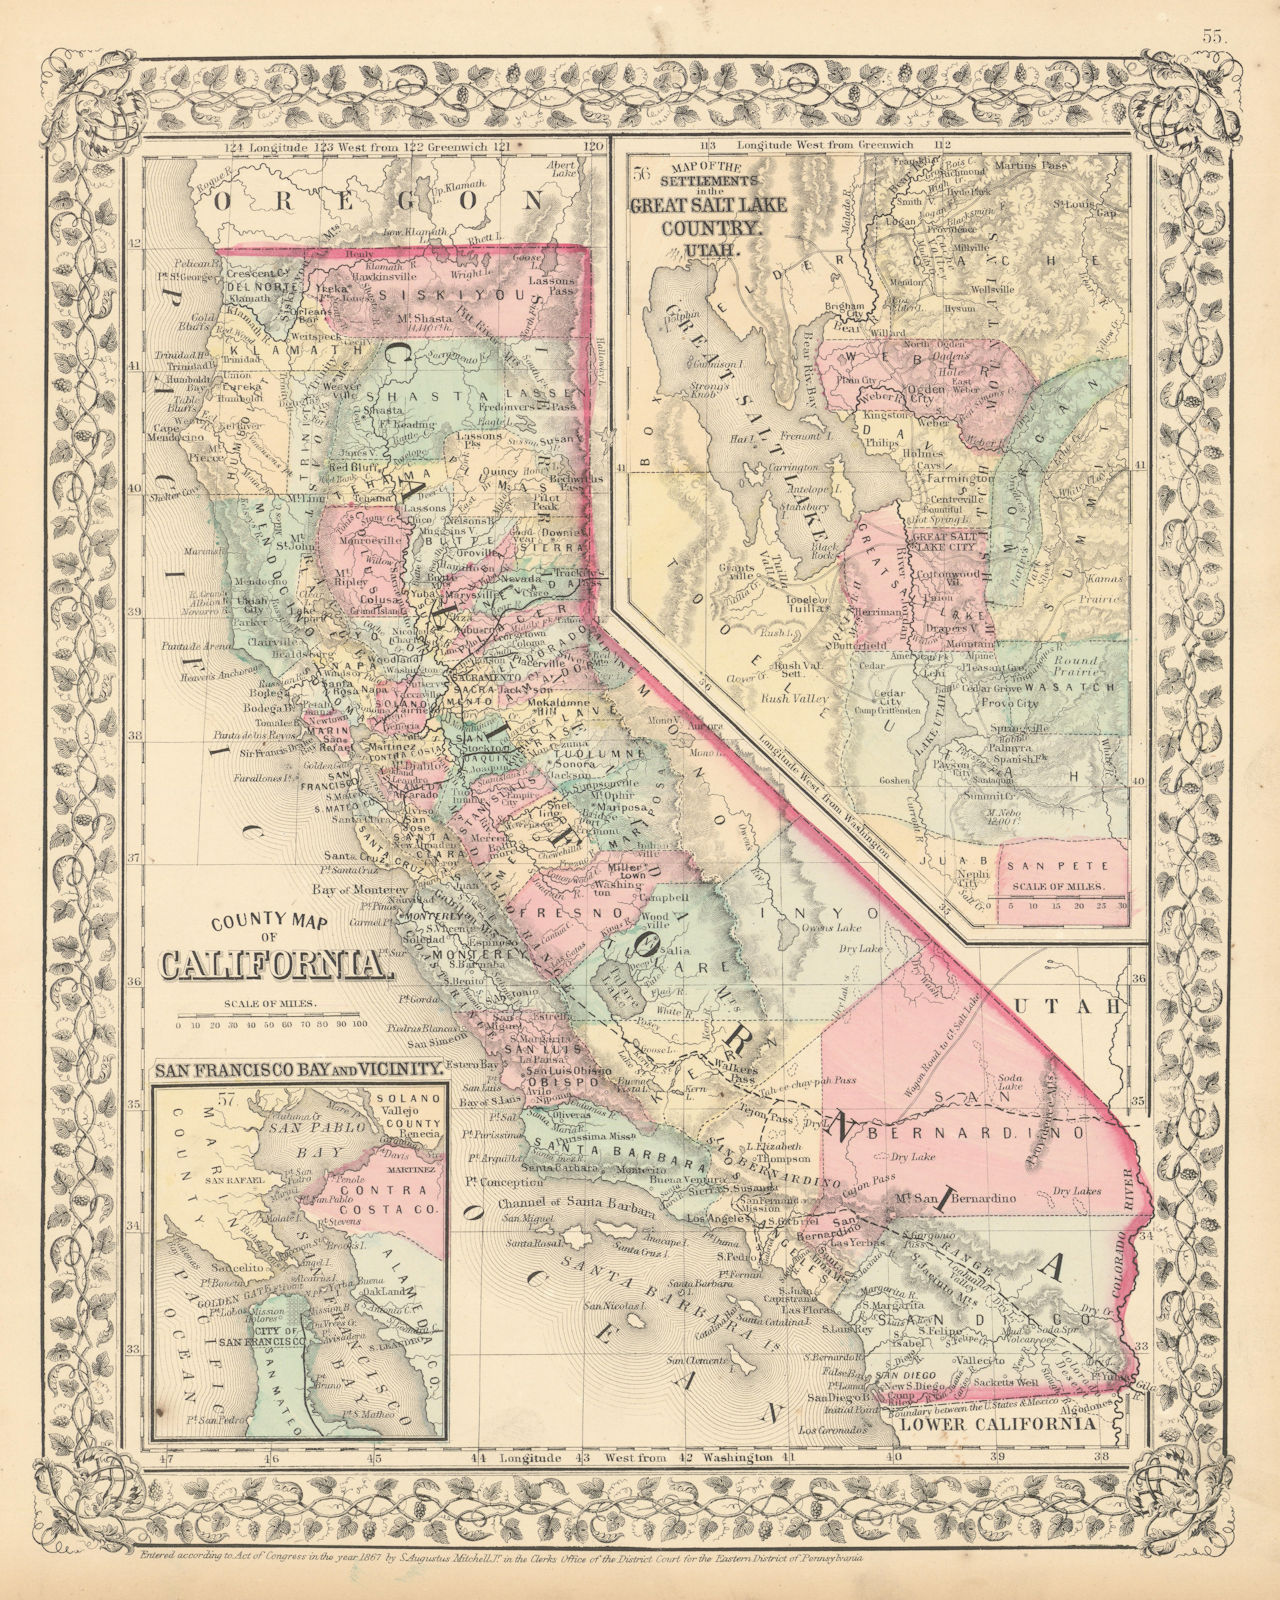 County map of California. The Great Salt Lake Country, Utah. MITCHELL 1869